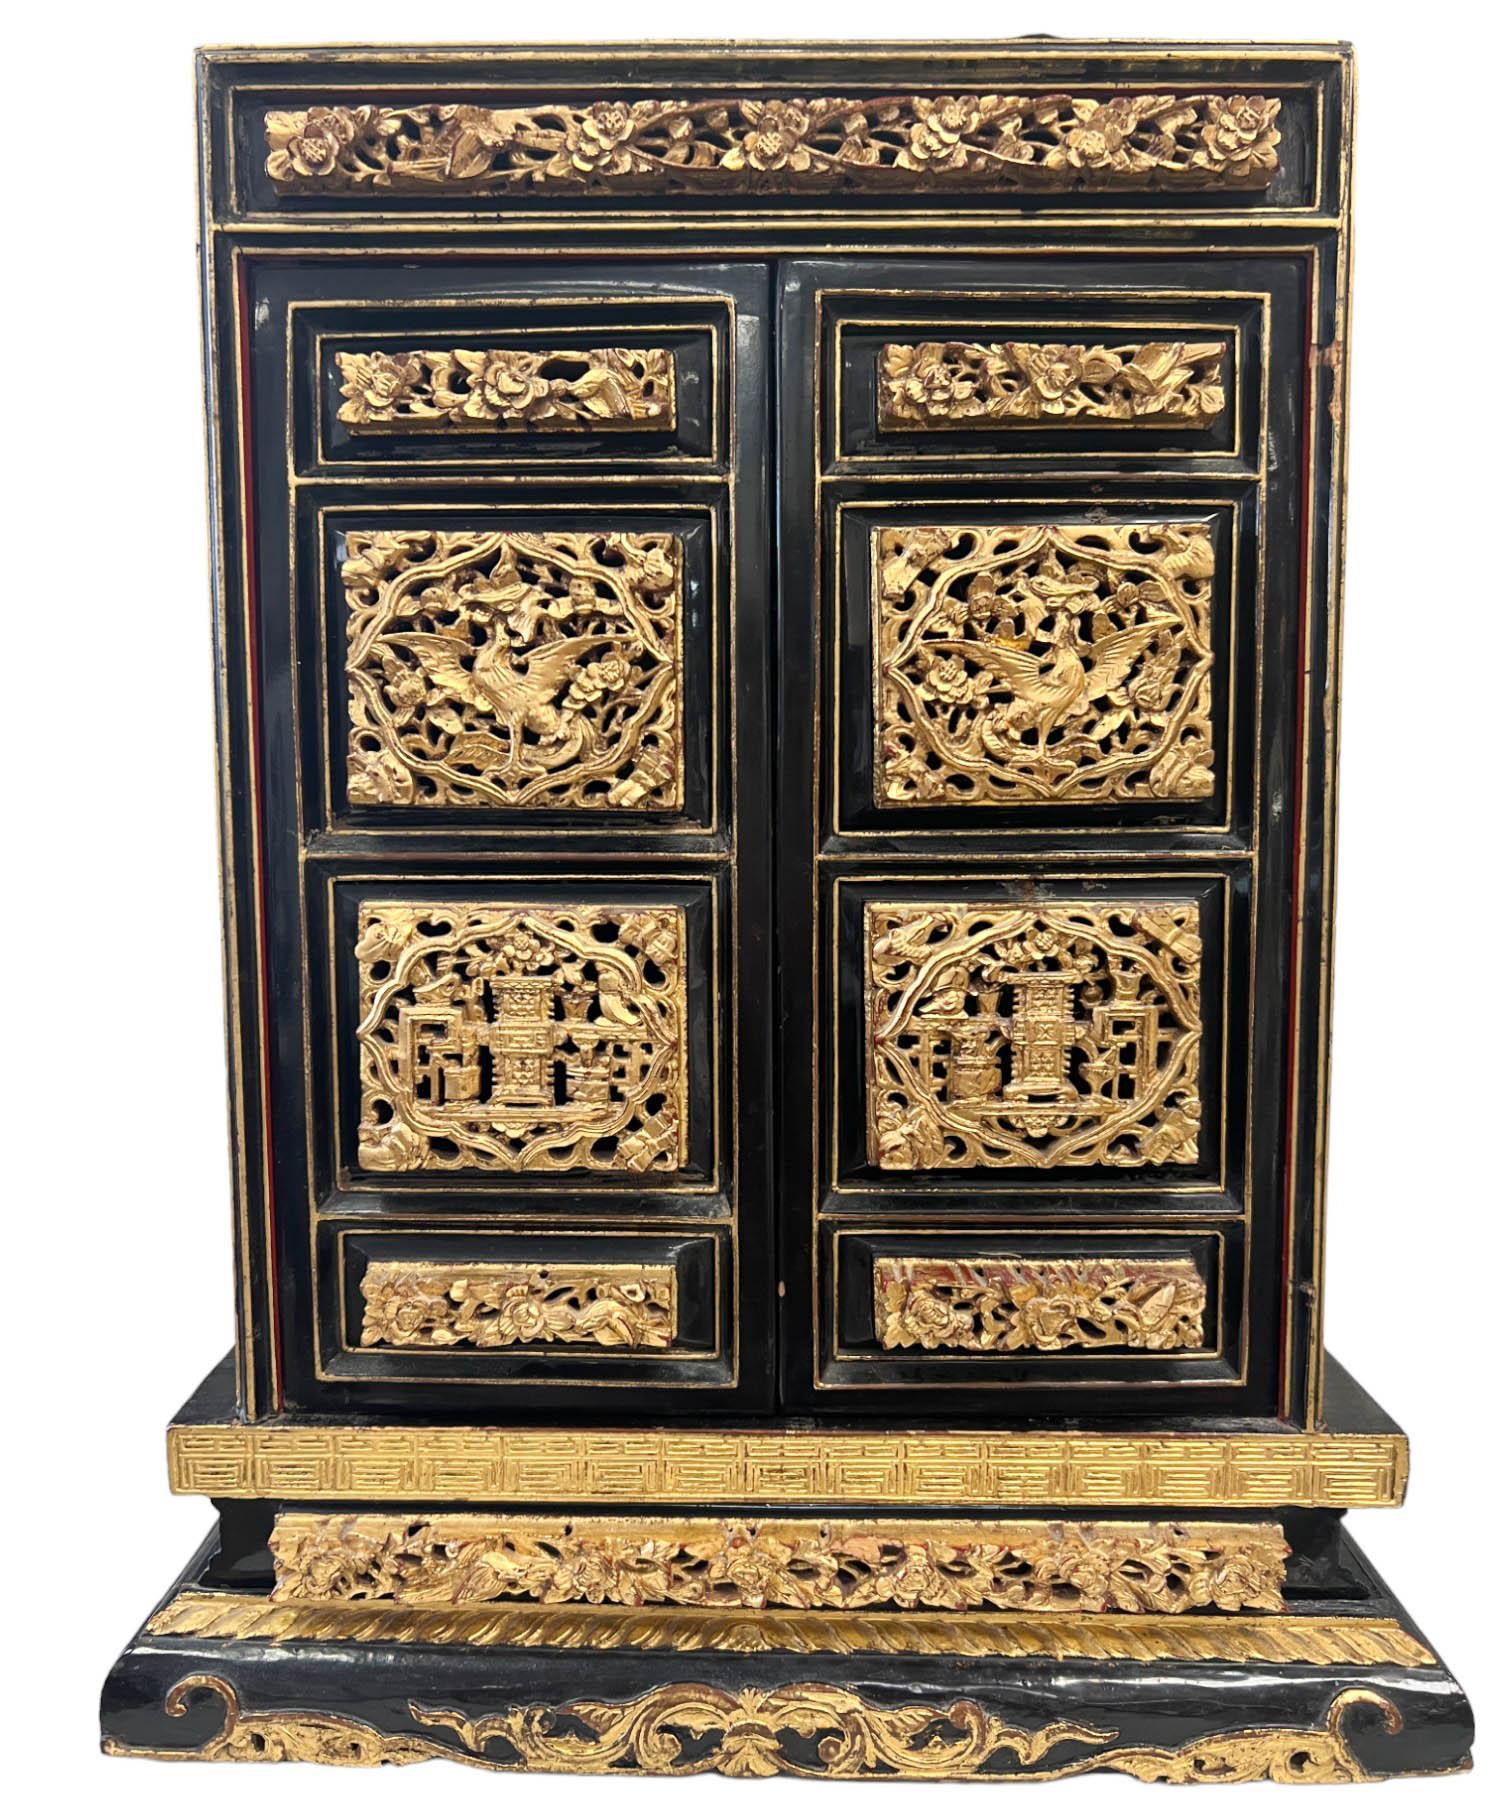 The Antique Butsudan Shrine is a remarkable piece of religious and cultural significance. Crafted with exquisite attention to detail, the cabinet showcases intricate wood carvings that adorn its exterior, creating a visually stunning and ornate